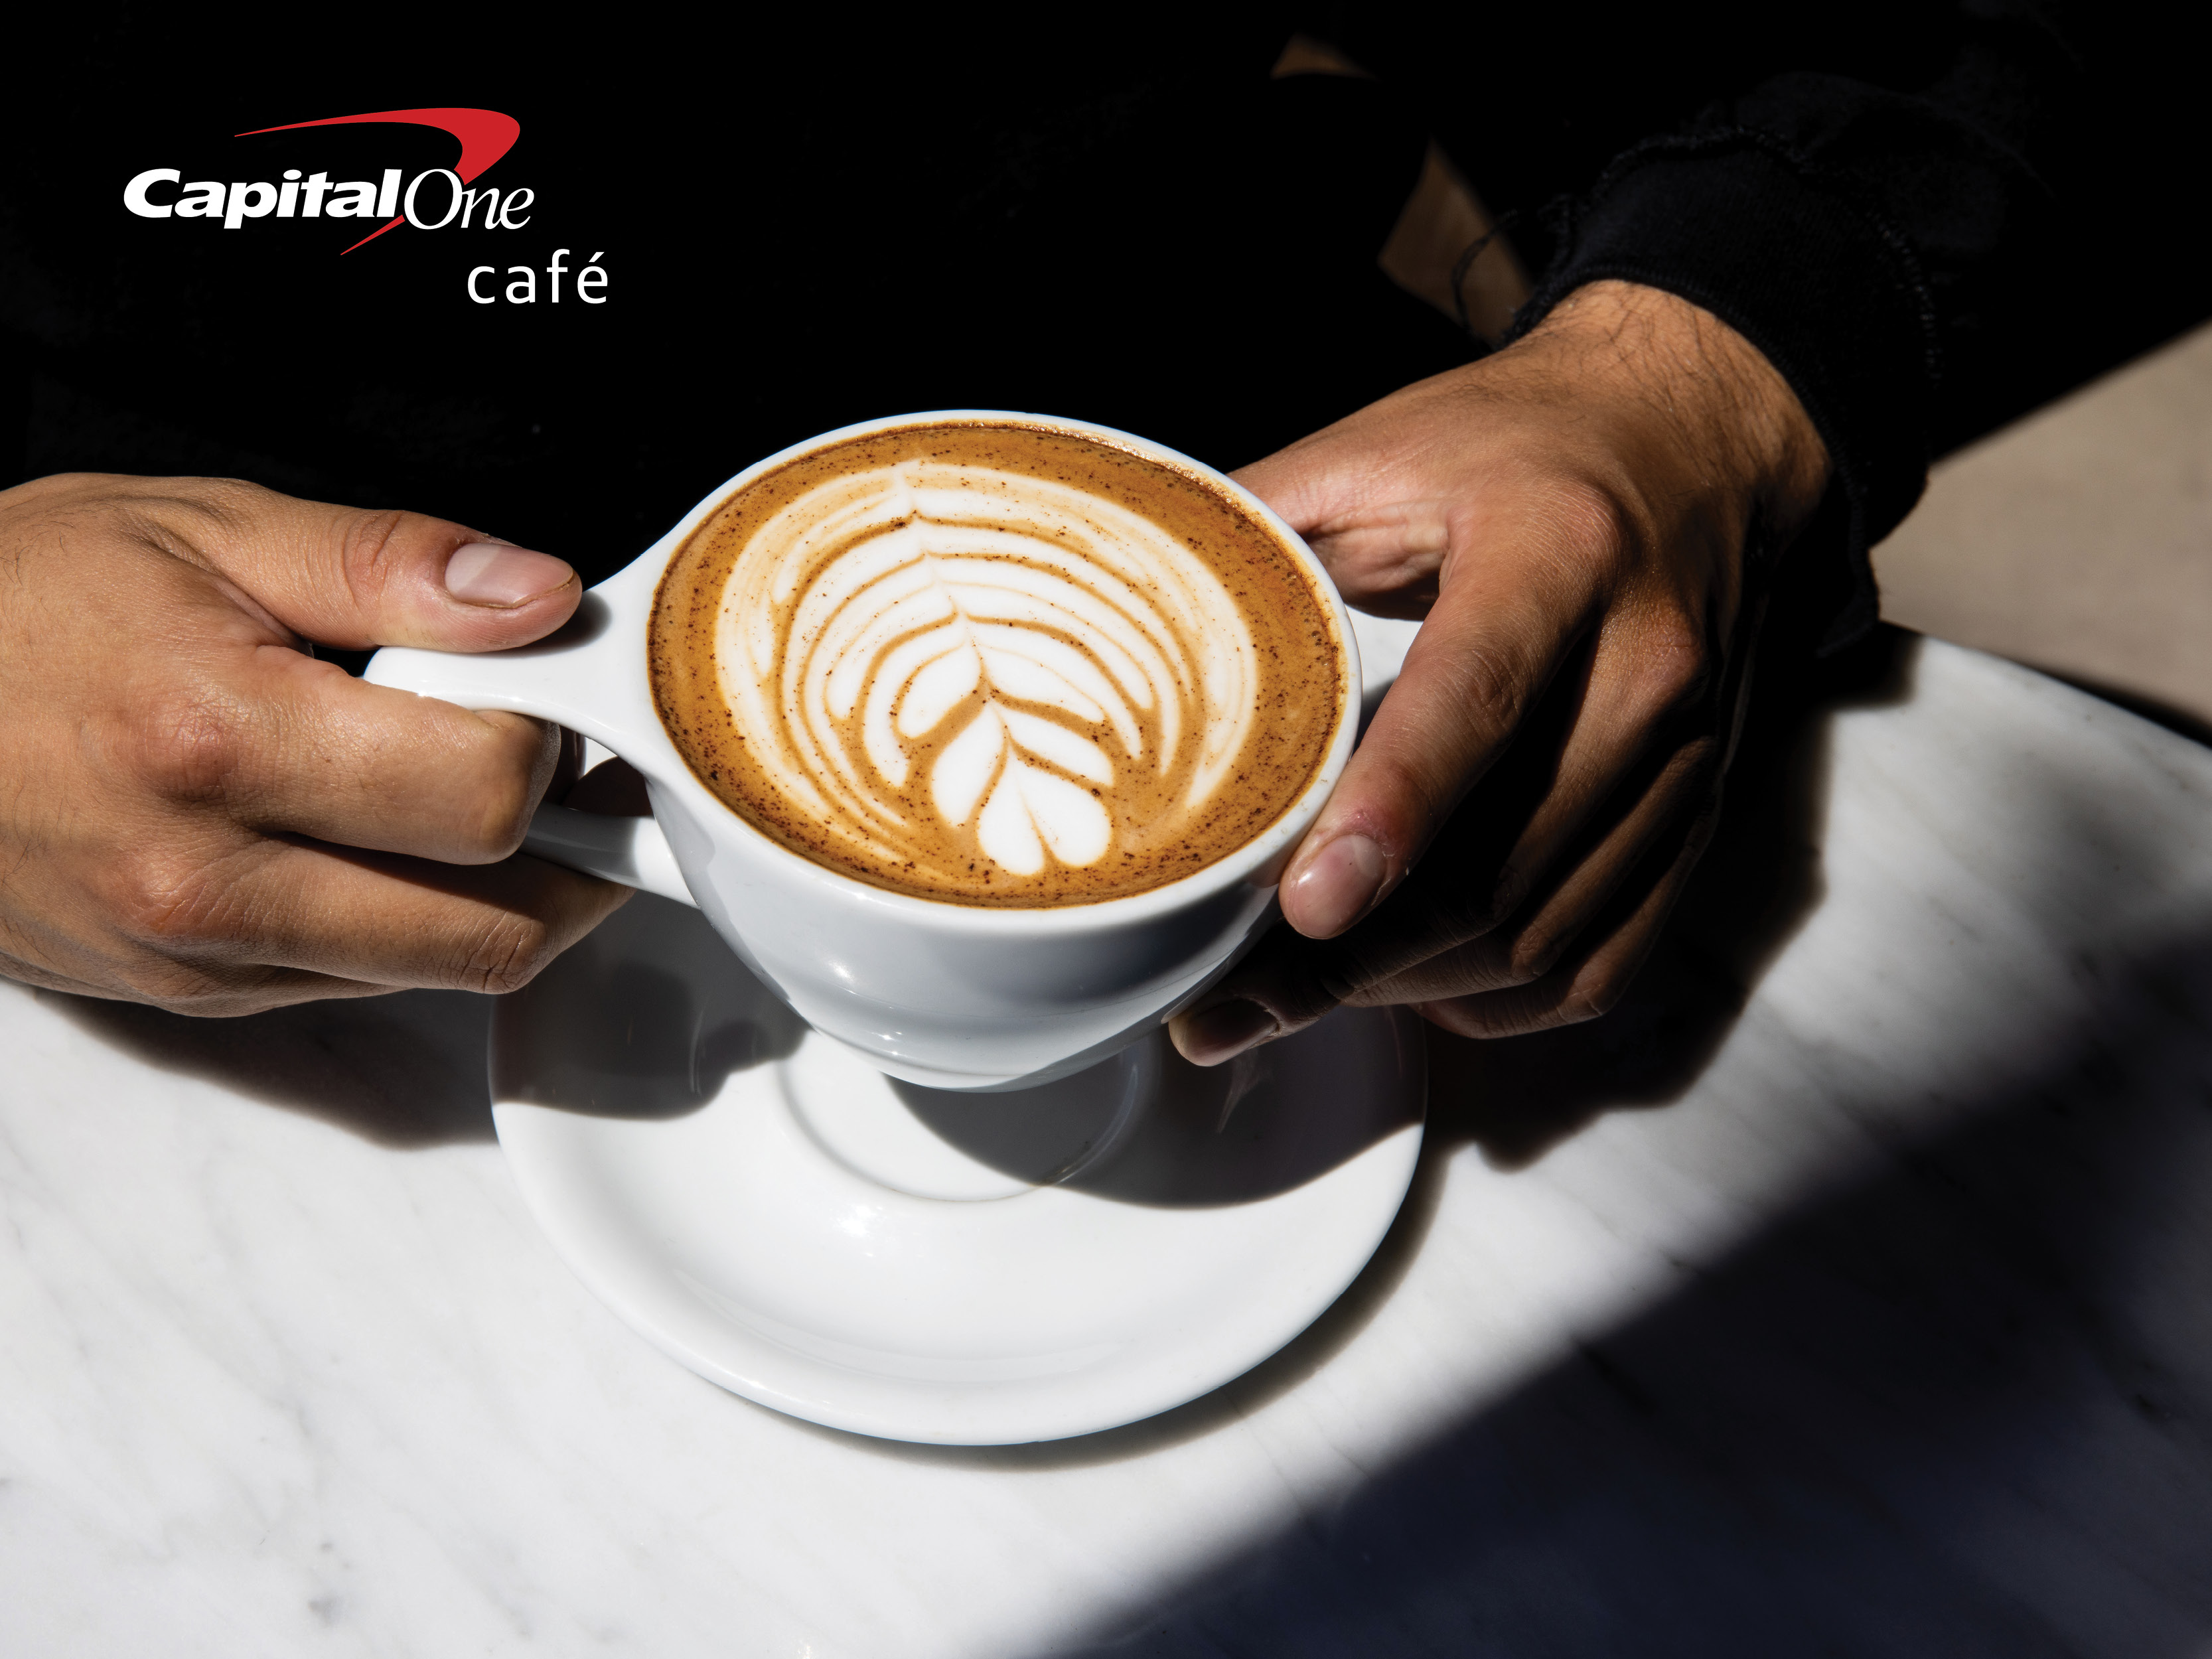 First Responders and Service Members - One Free Handcrafted Beverage from Capital One Cafe